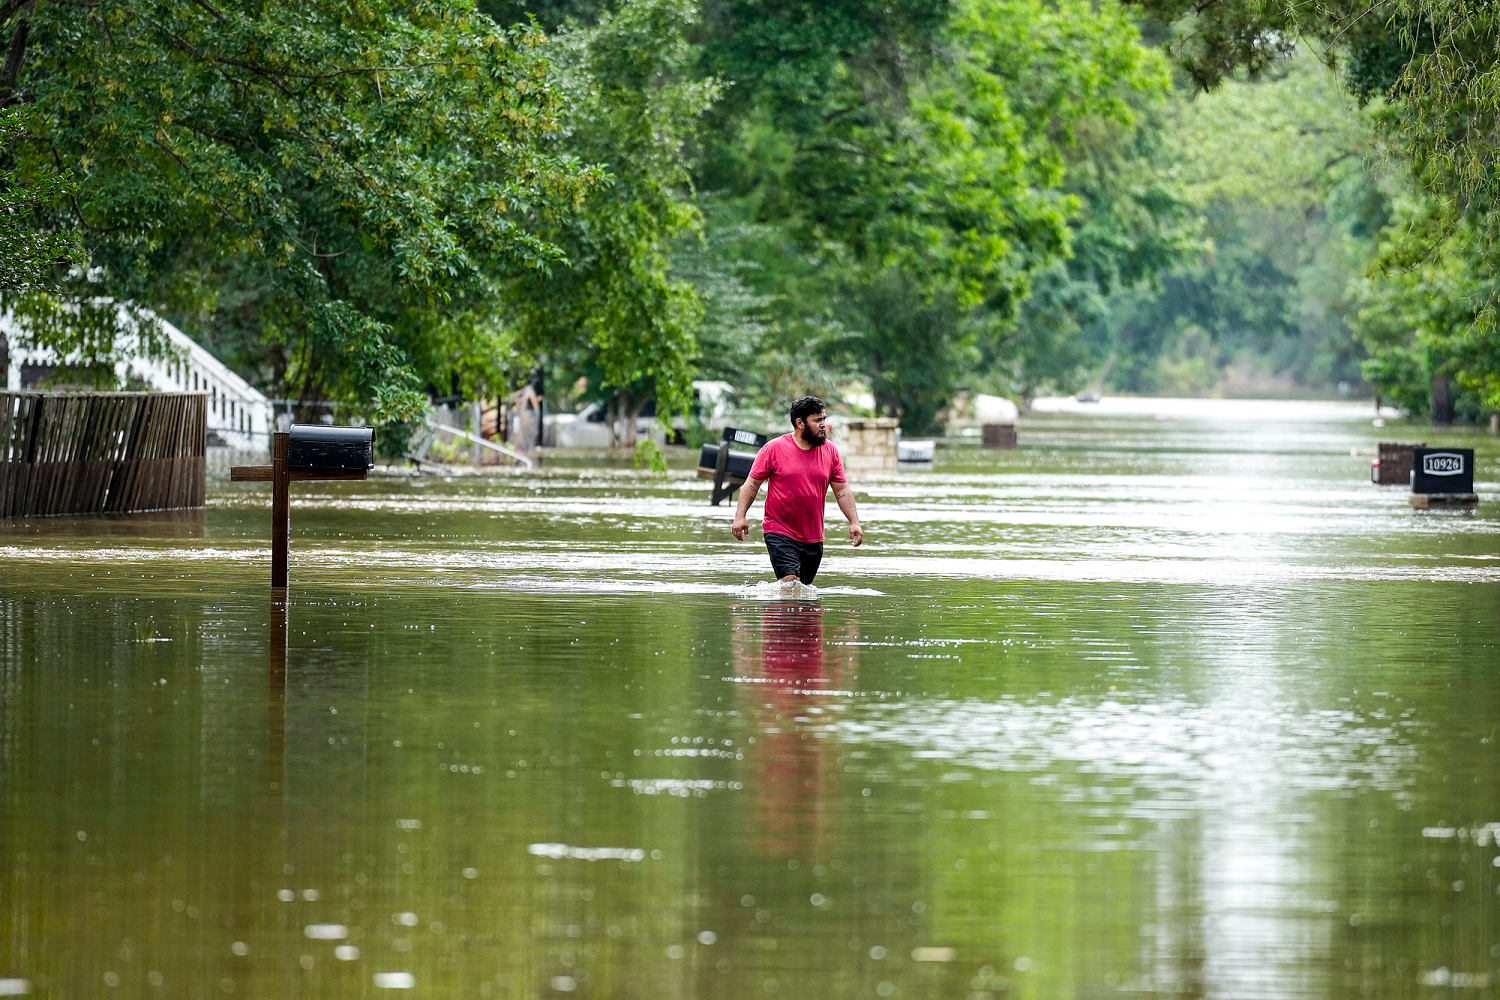 Child dies after being swept away in floodwaters; storms move away from Texas